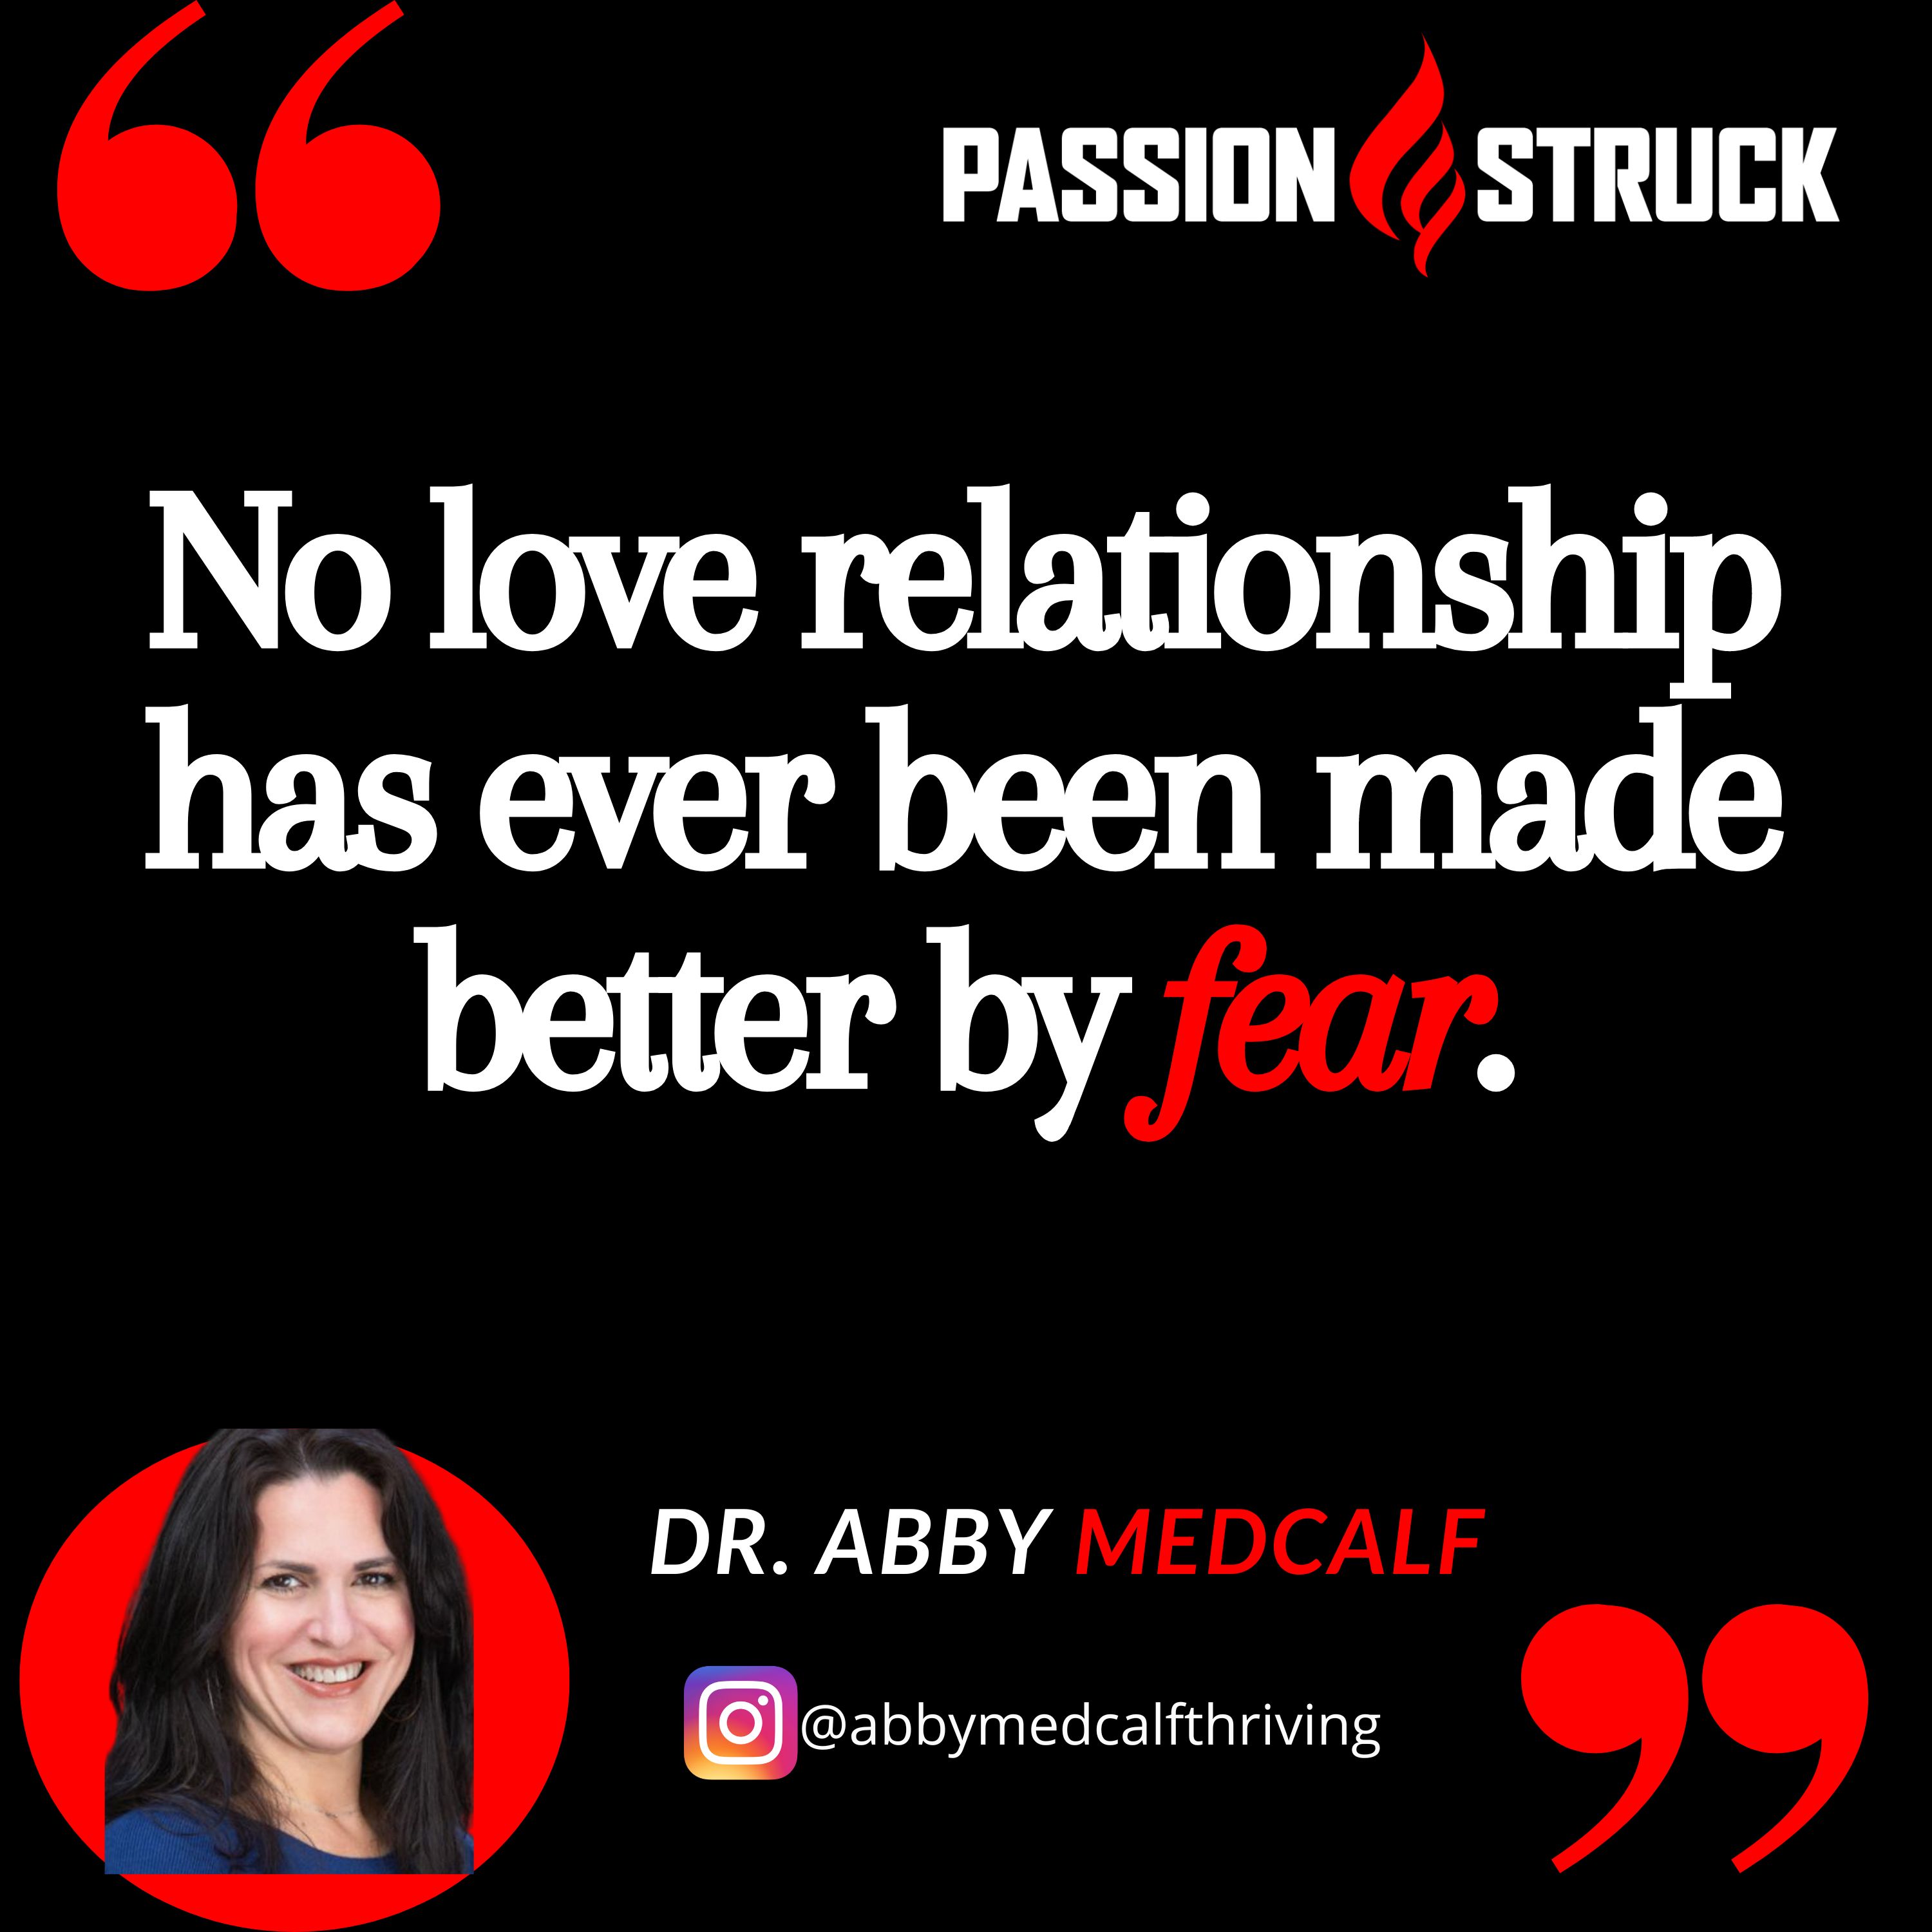 Dr. Abby Medcalf Quote from the Passion Struck Podcast: No love relationship has ever been made better by fear.